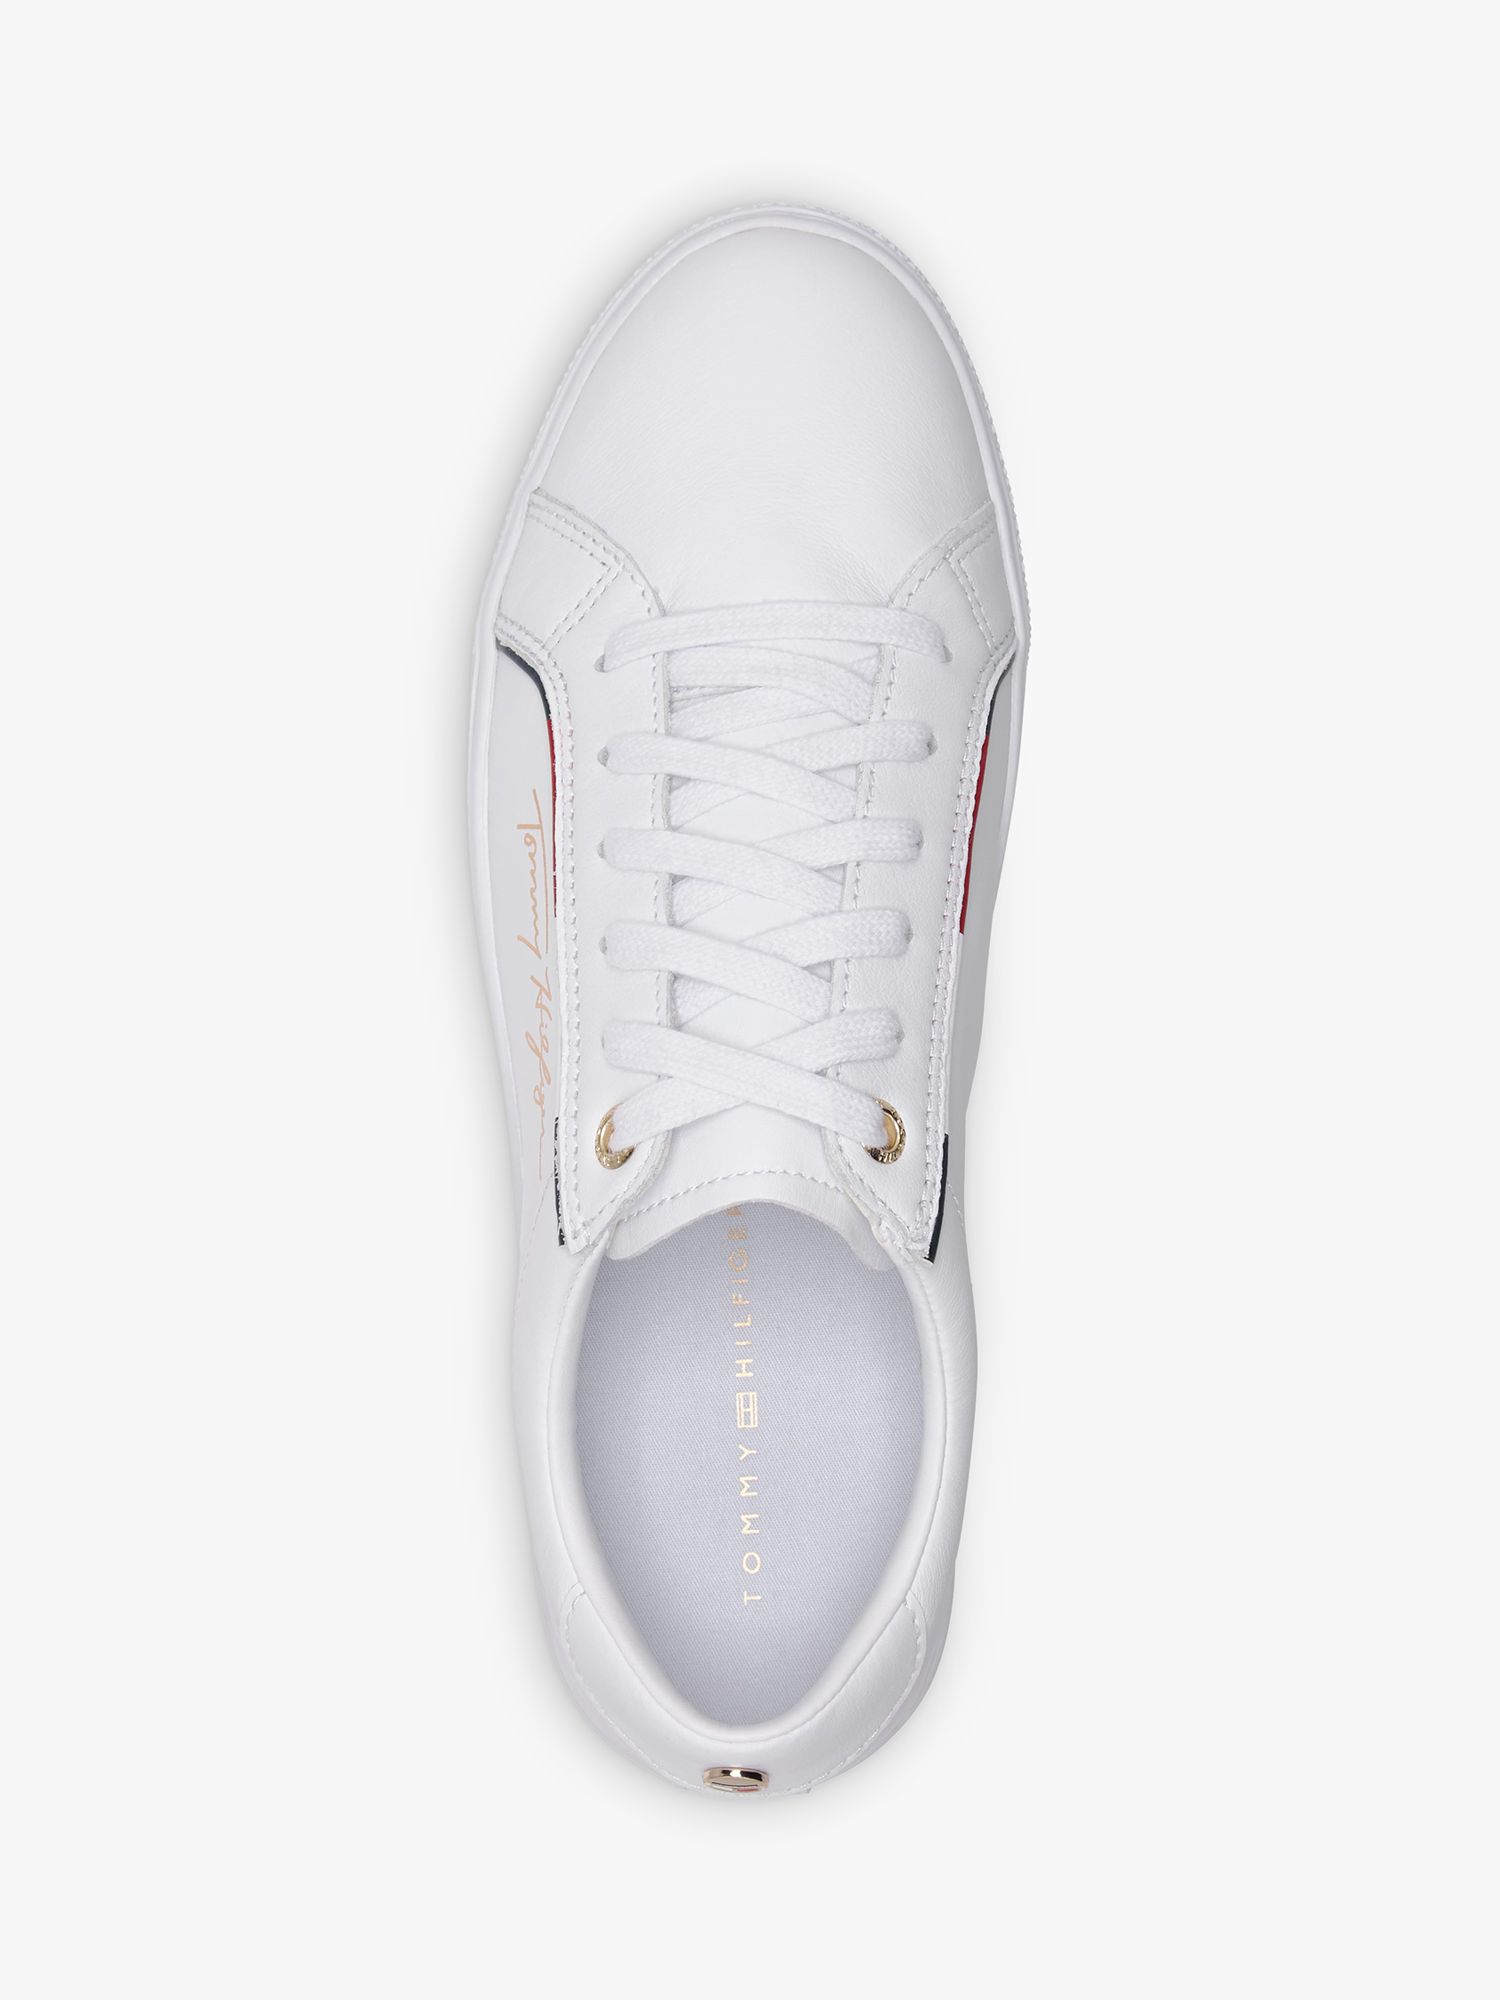 Tommy Hilfiger Signature Leather Trainers, White, 3